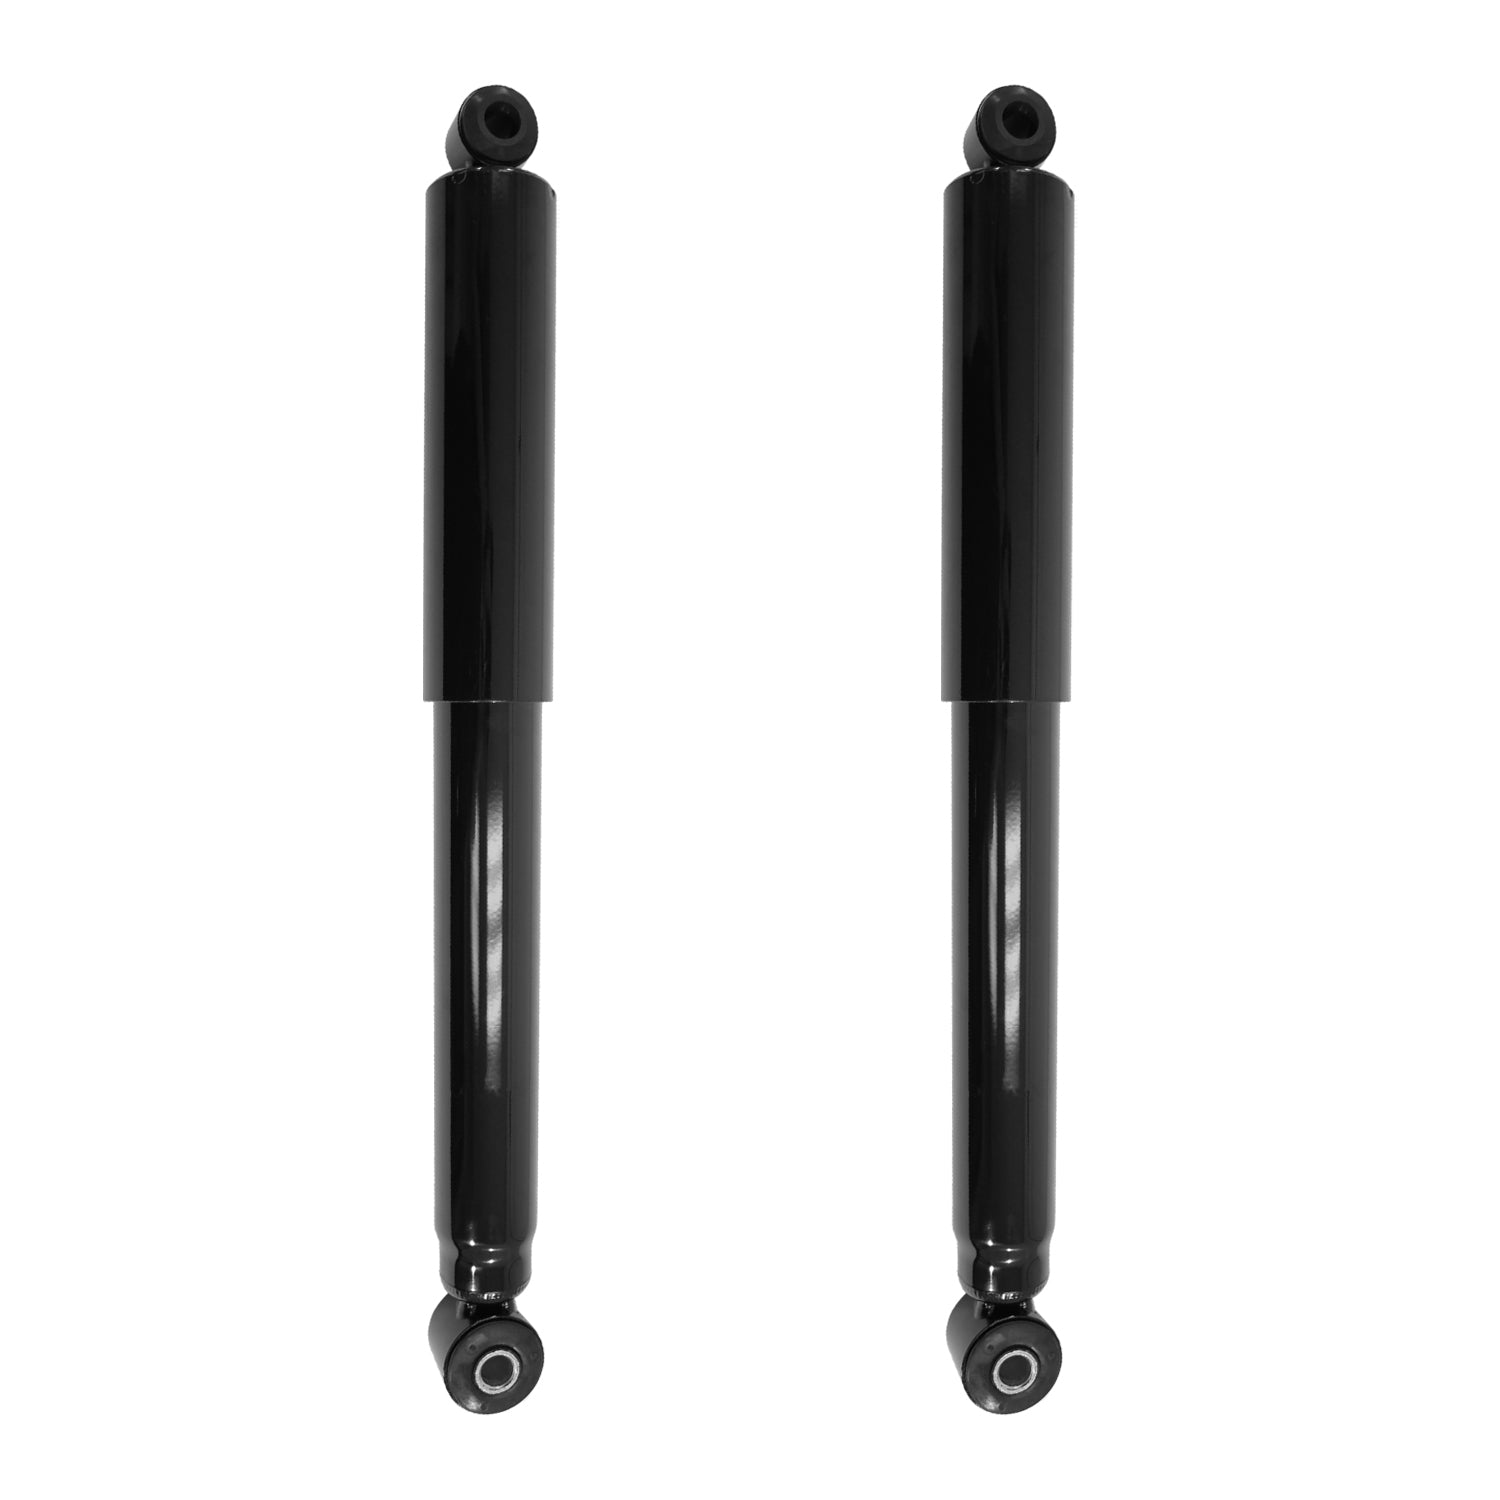 Unity 2-255240-001 Rear Pair Shock Absorber Kit for 2005-2015 Nissan Xterra 4WD